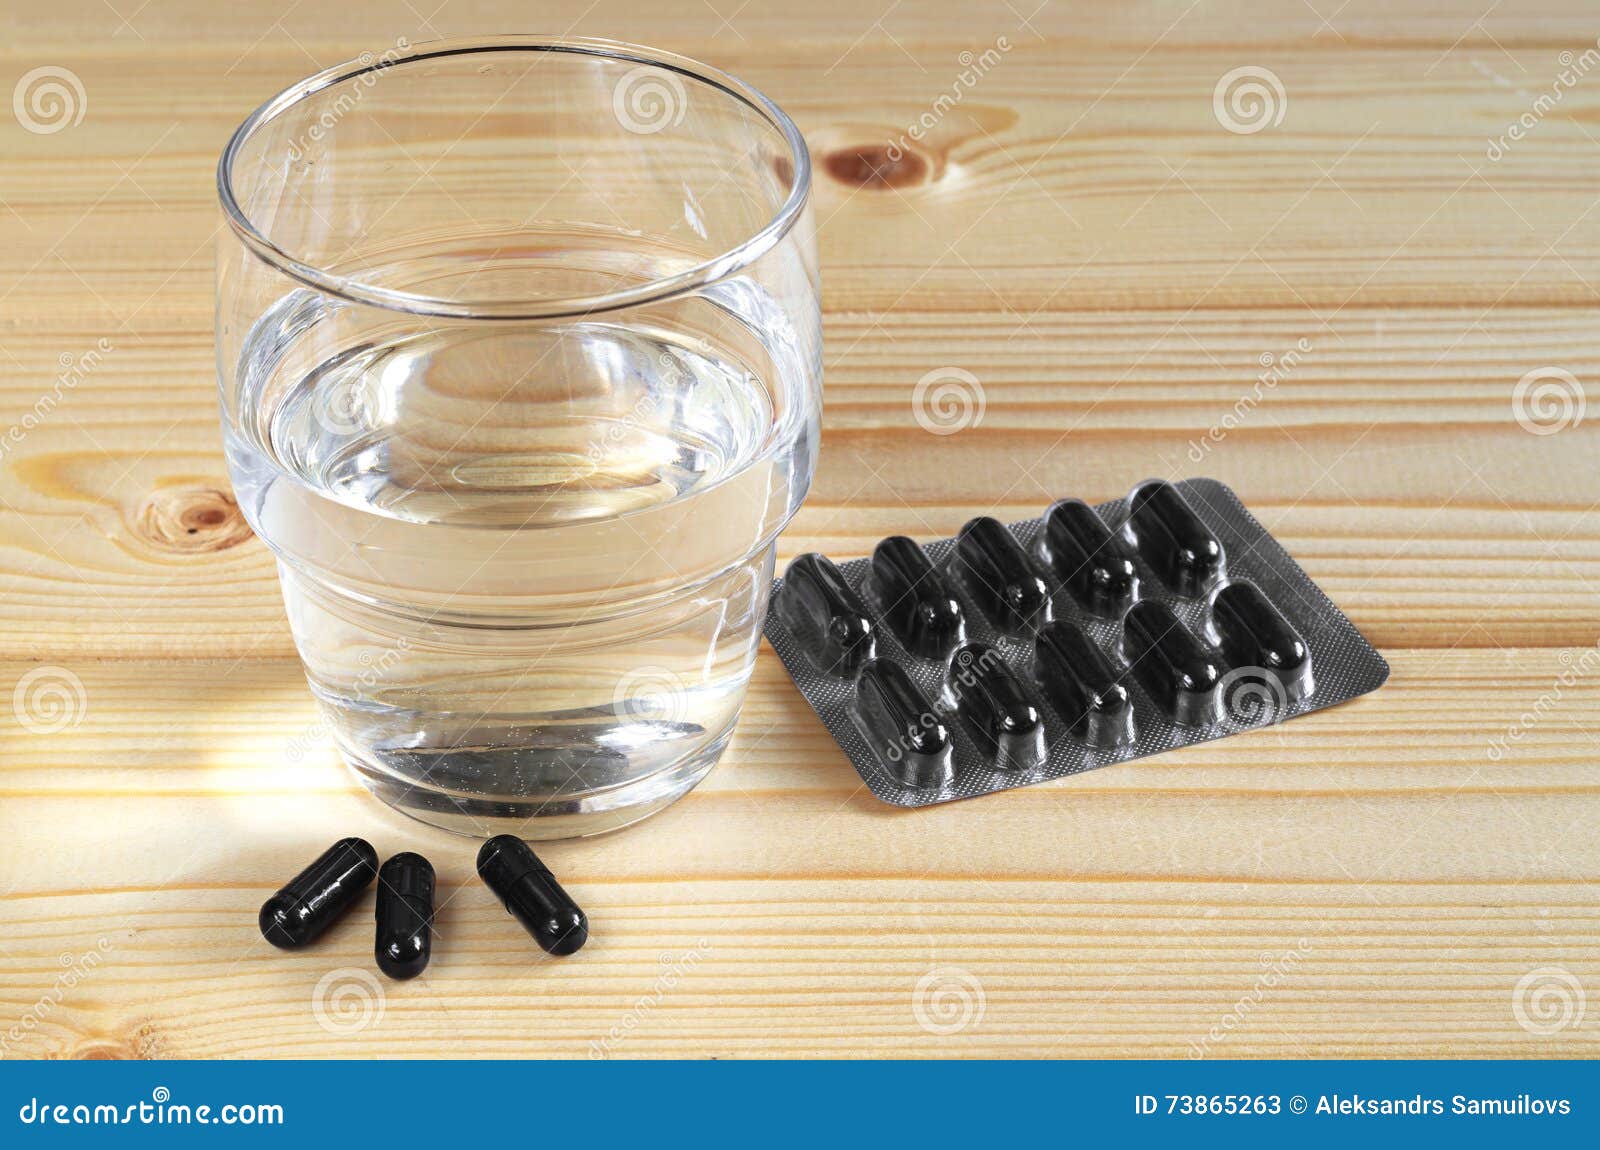 activated charcoal and water